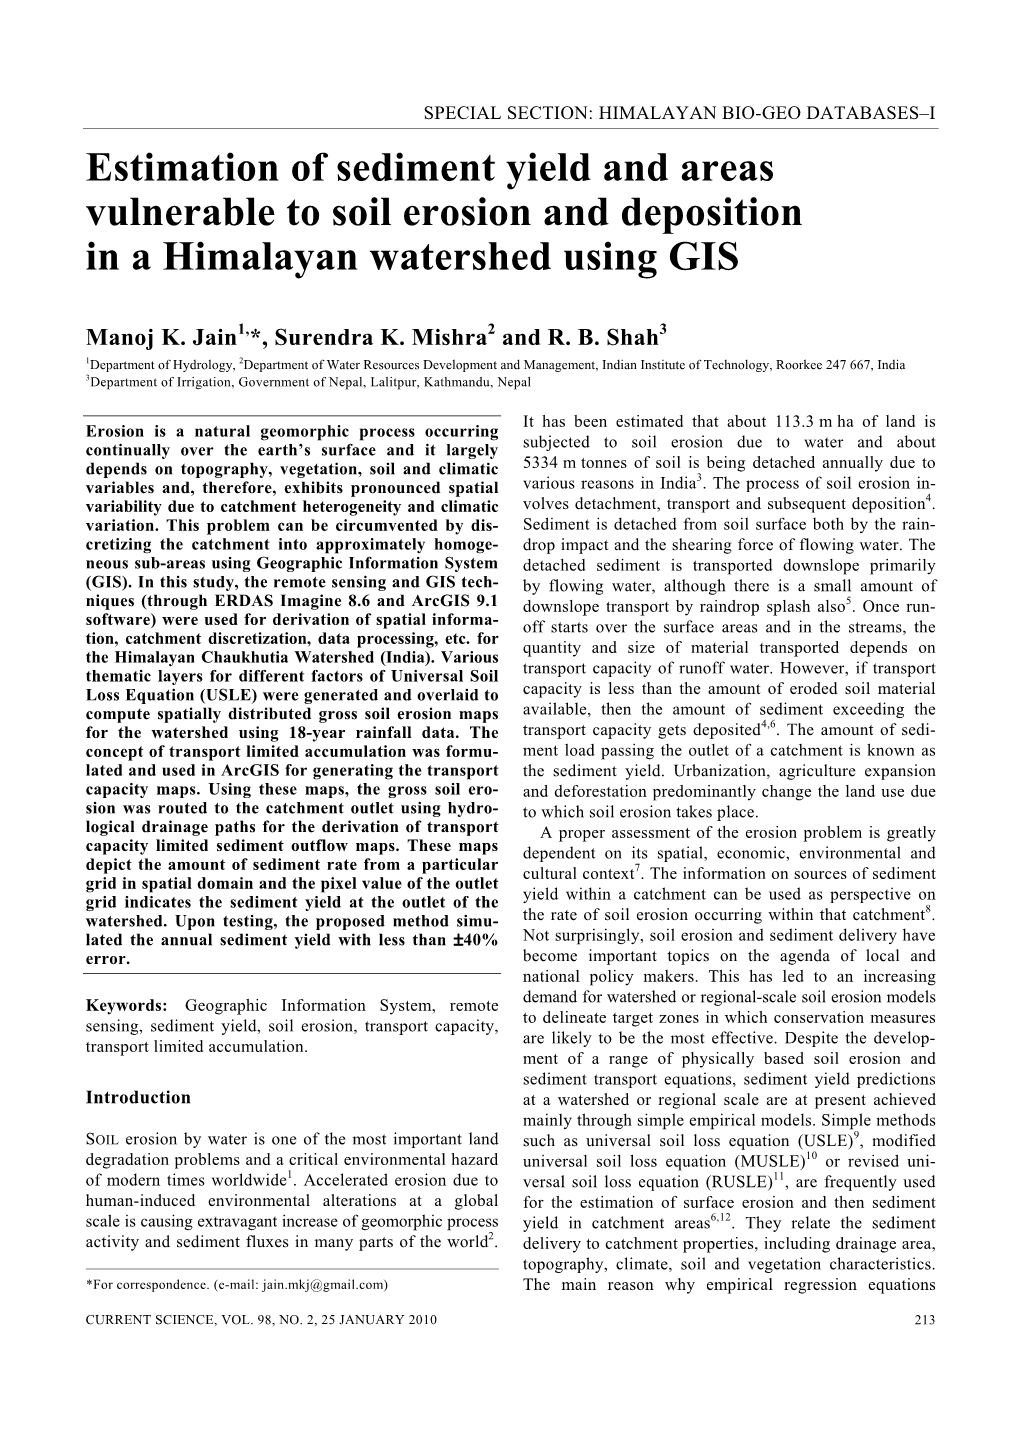 Estimation of Sediment Yield and Areas Vulnerable to Soil Erosion and Deposition in a Himalayan Watershed Using GIS